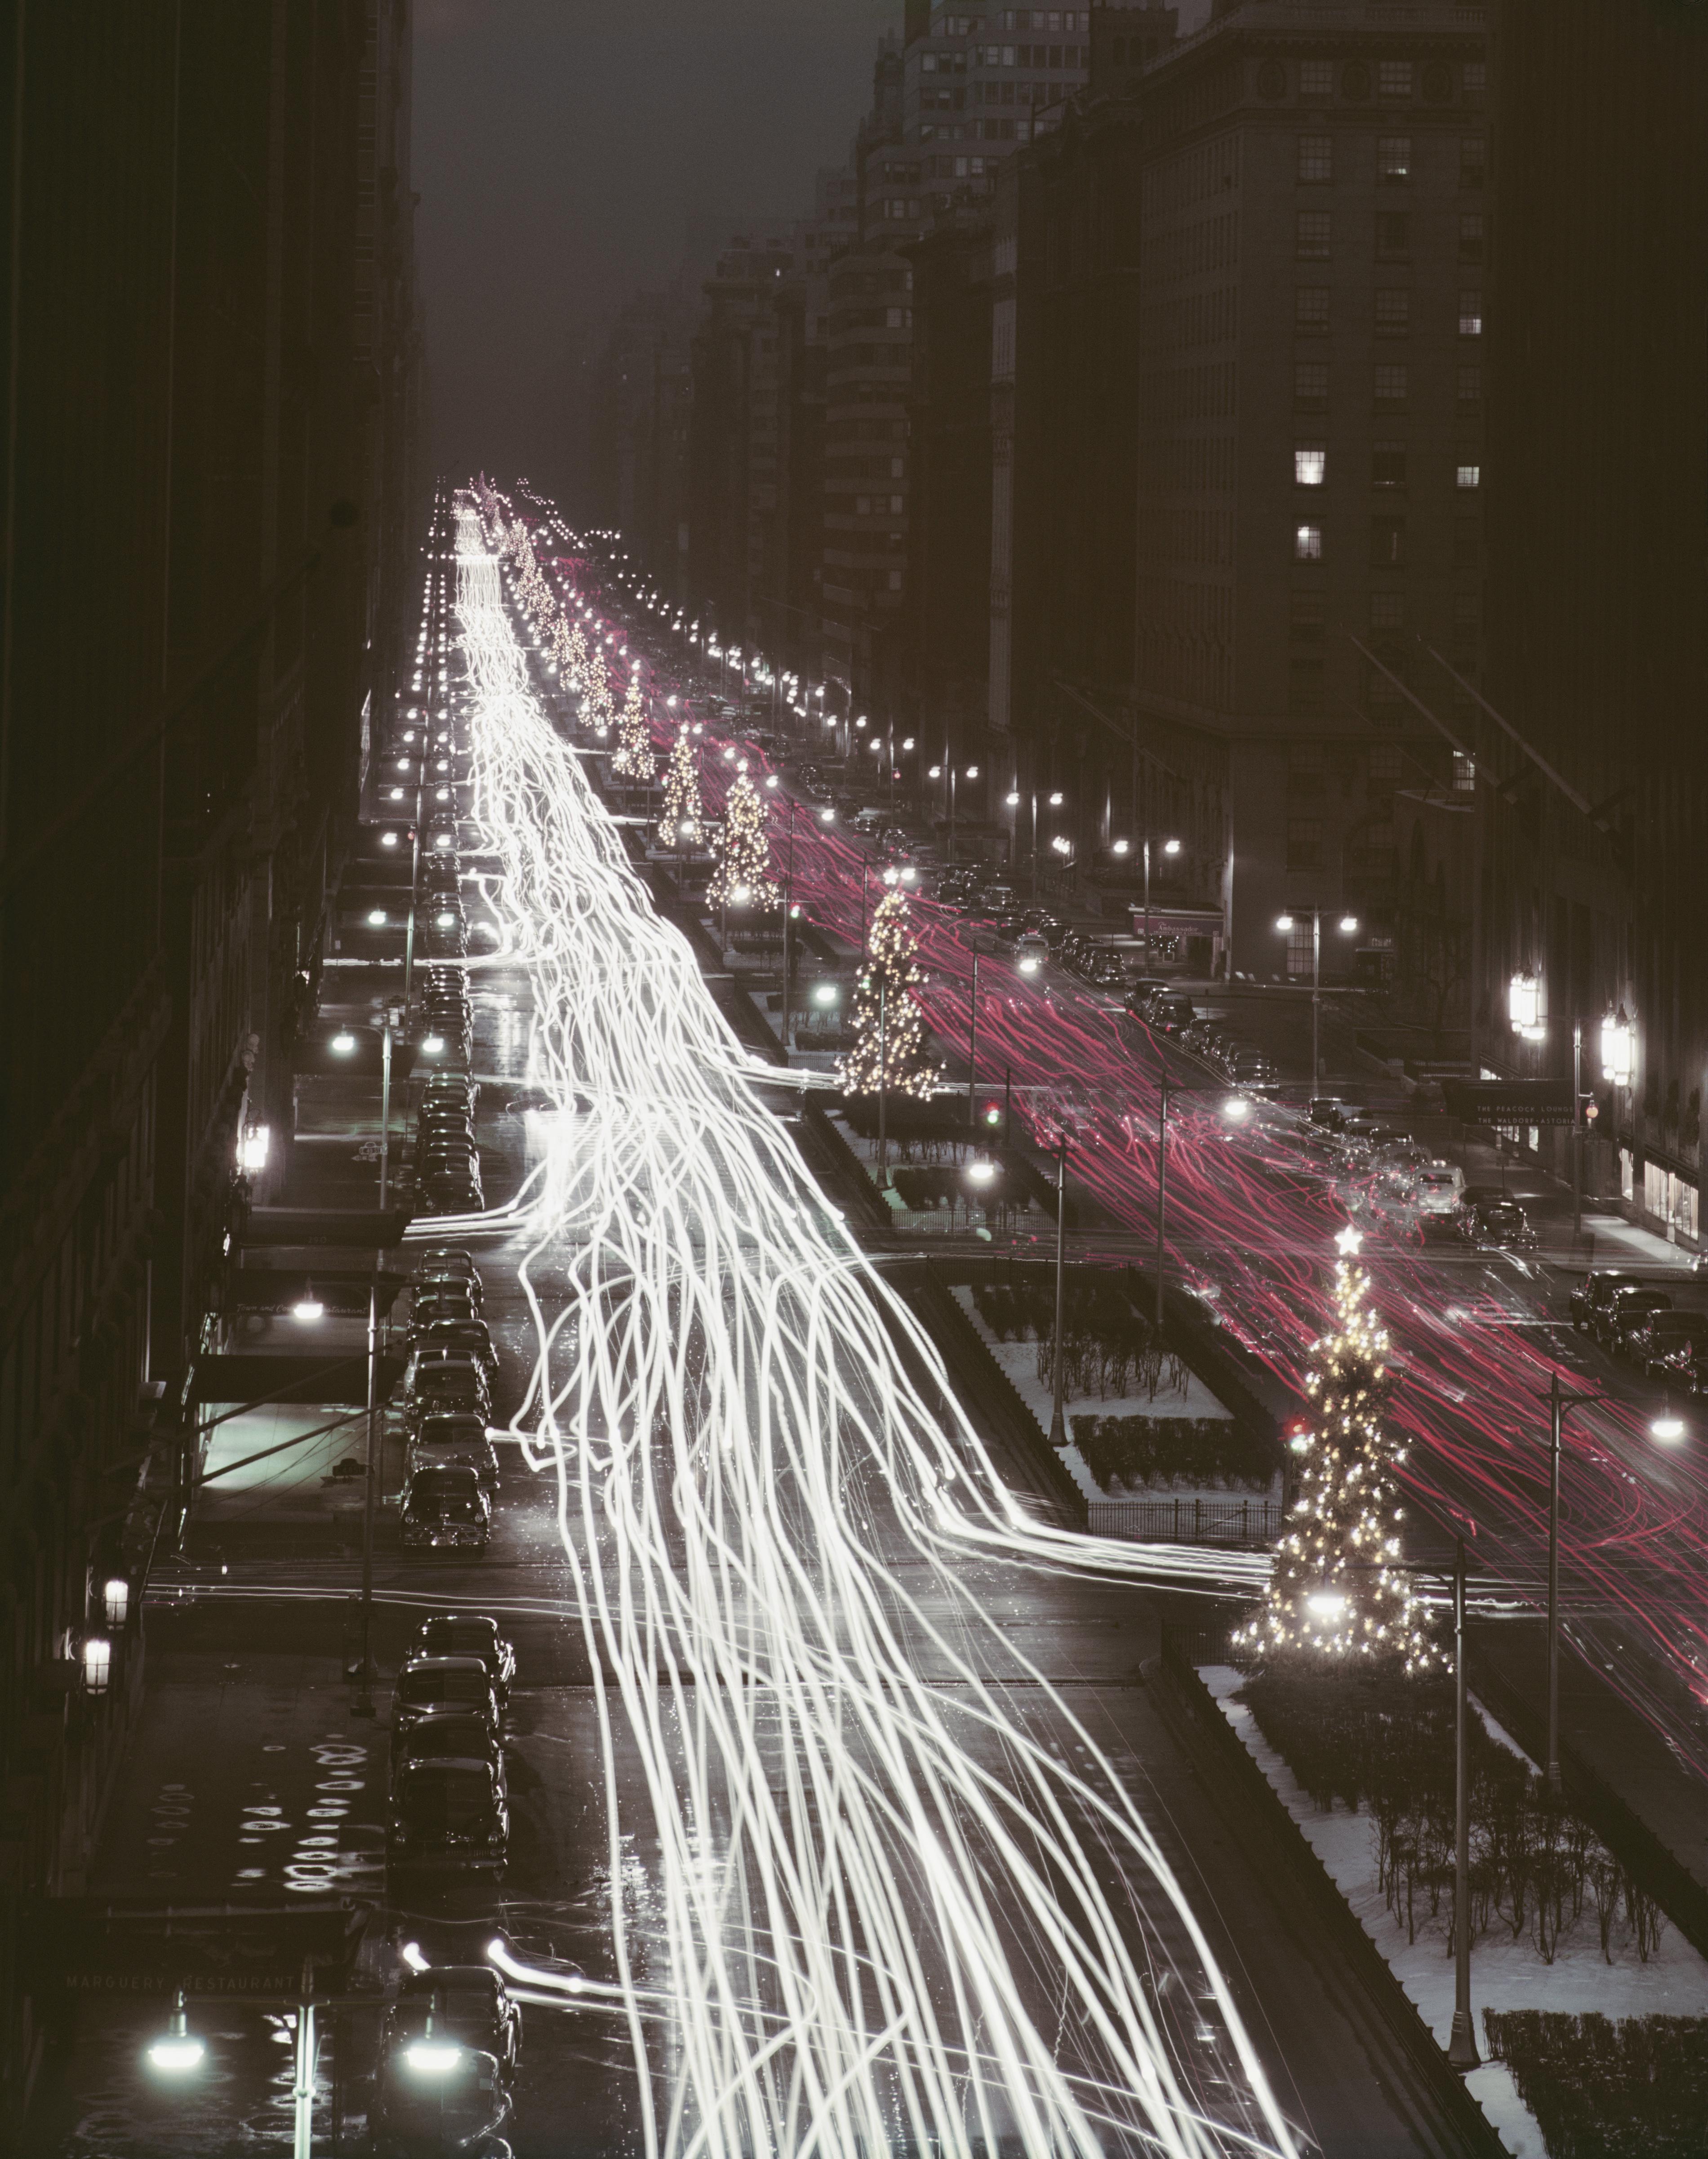 Christmas trees and red and white automobile light trails on Park Avenue, New York at Christmas time, December 1953. 

Once a year, we introduce never-before-seen Slim Aarons images! This is one of fifteen from our new collection. A word from our